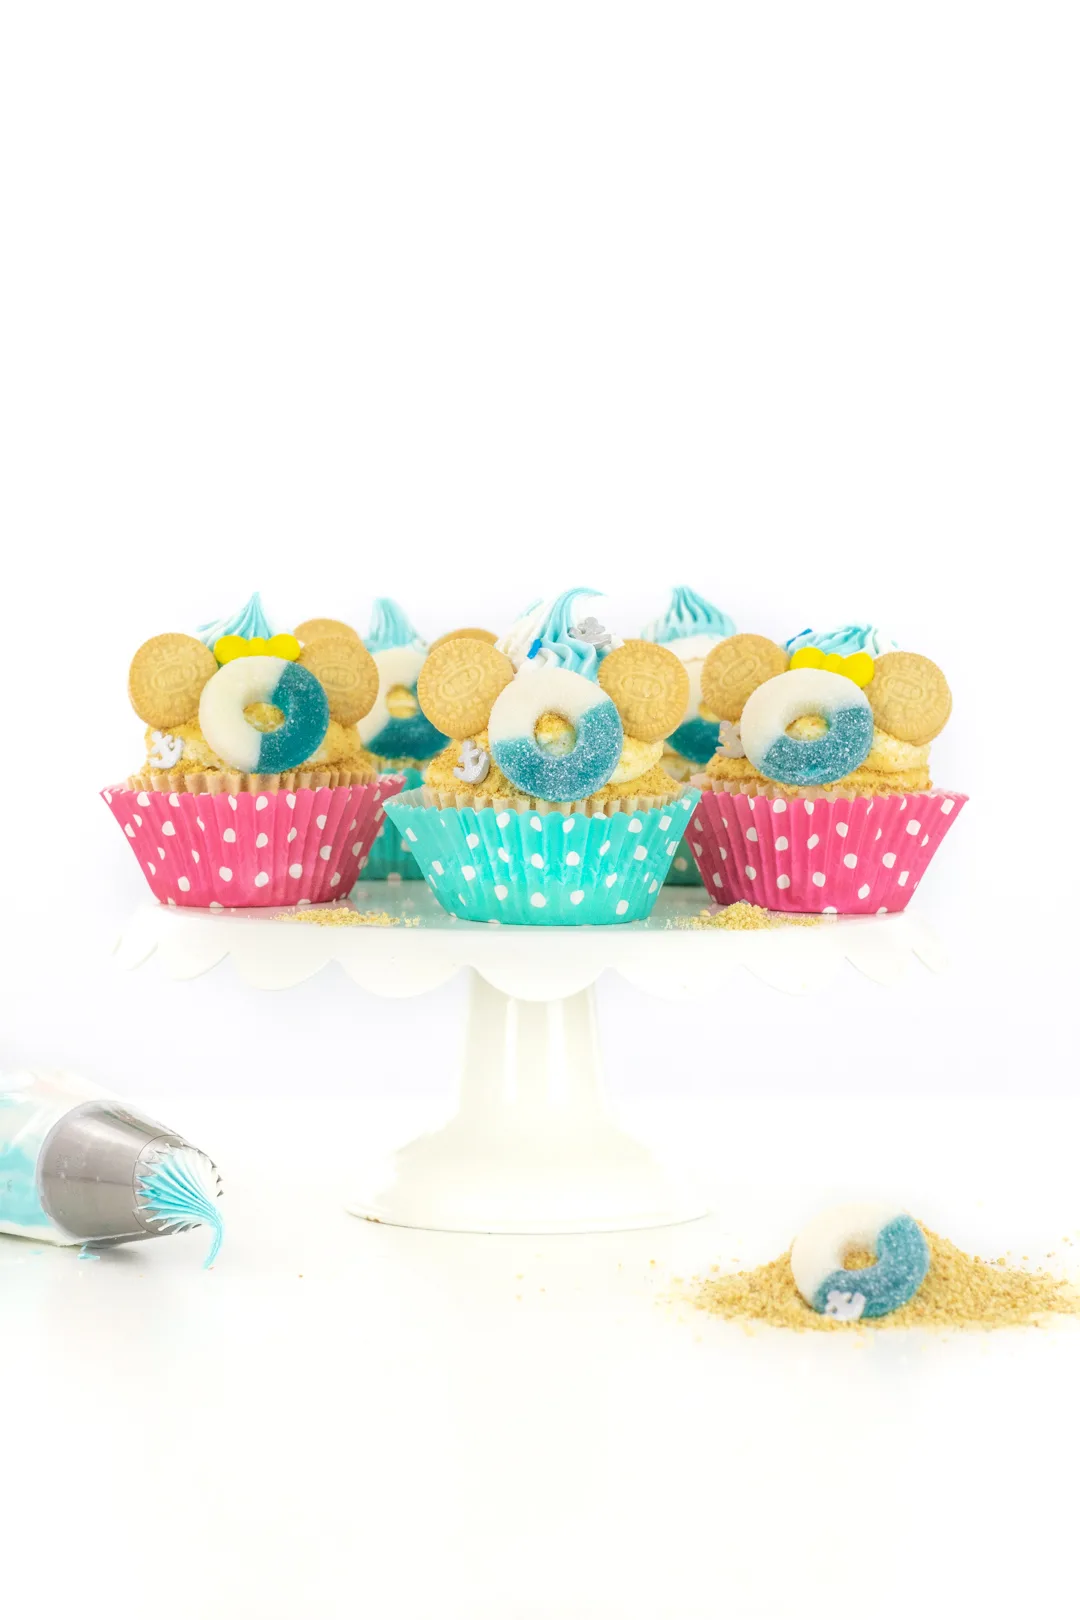 disney cruise cupcakes with polka dot cupcake wrappers pink and teal